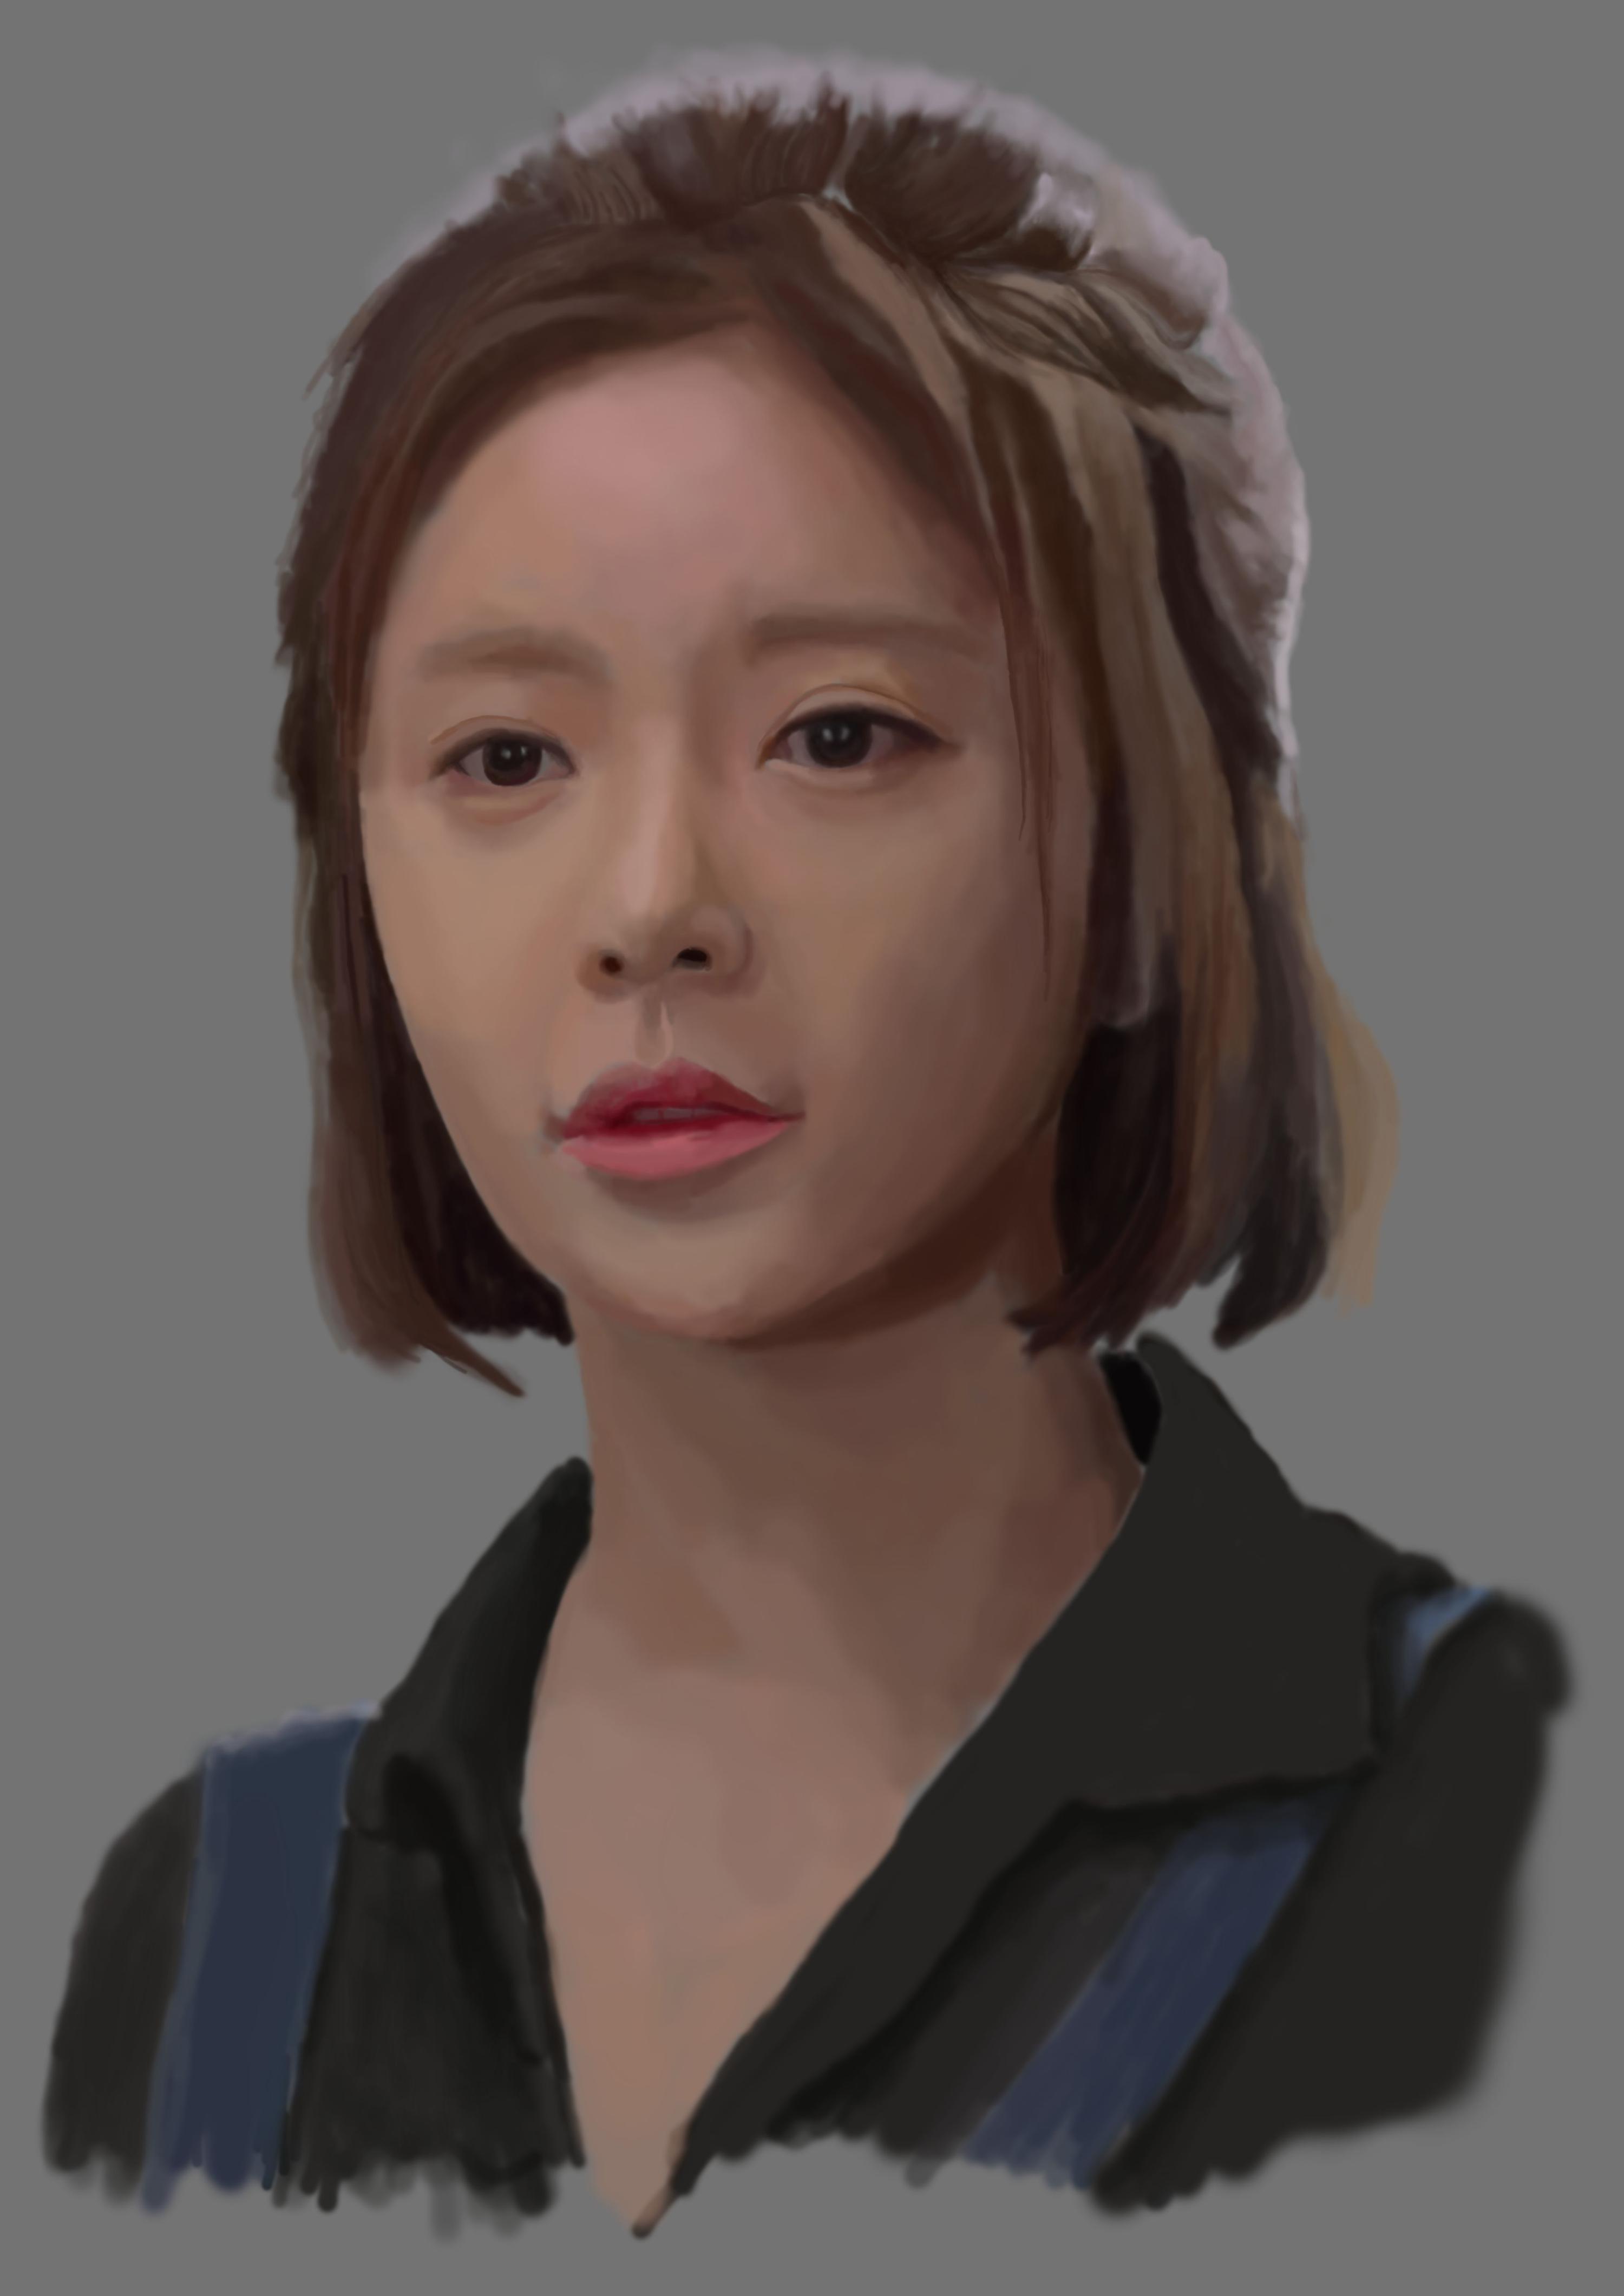 Digital Painting (from She was pretty) - Krita